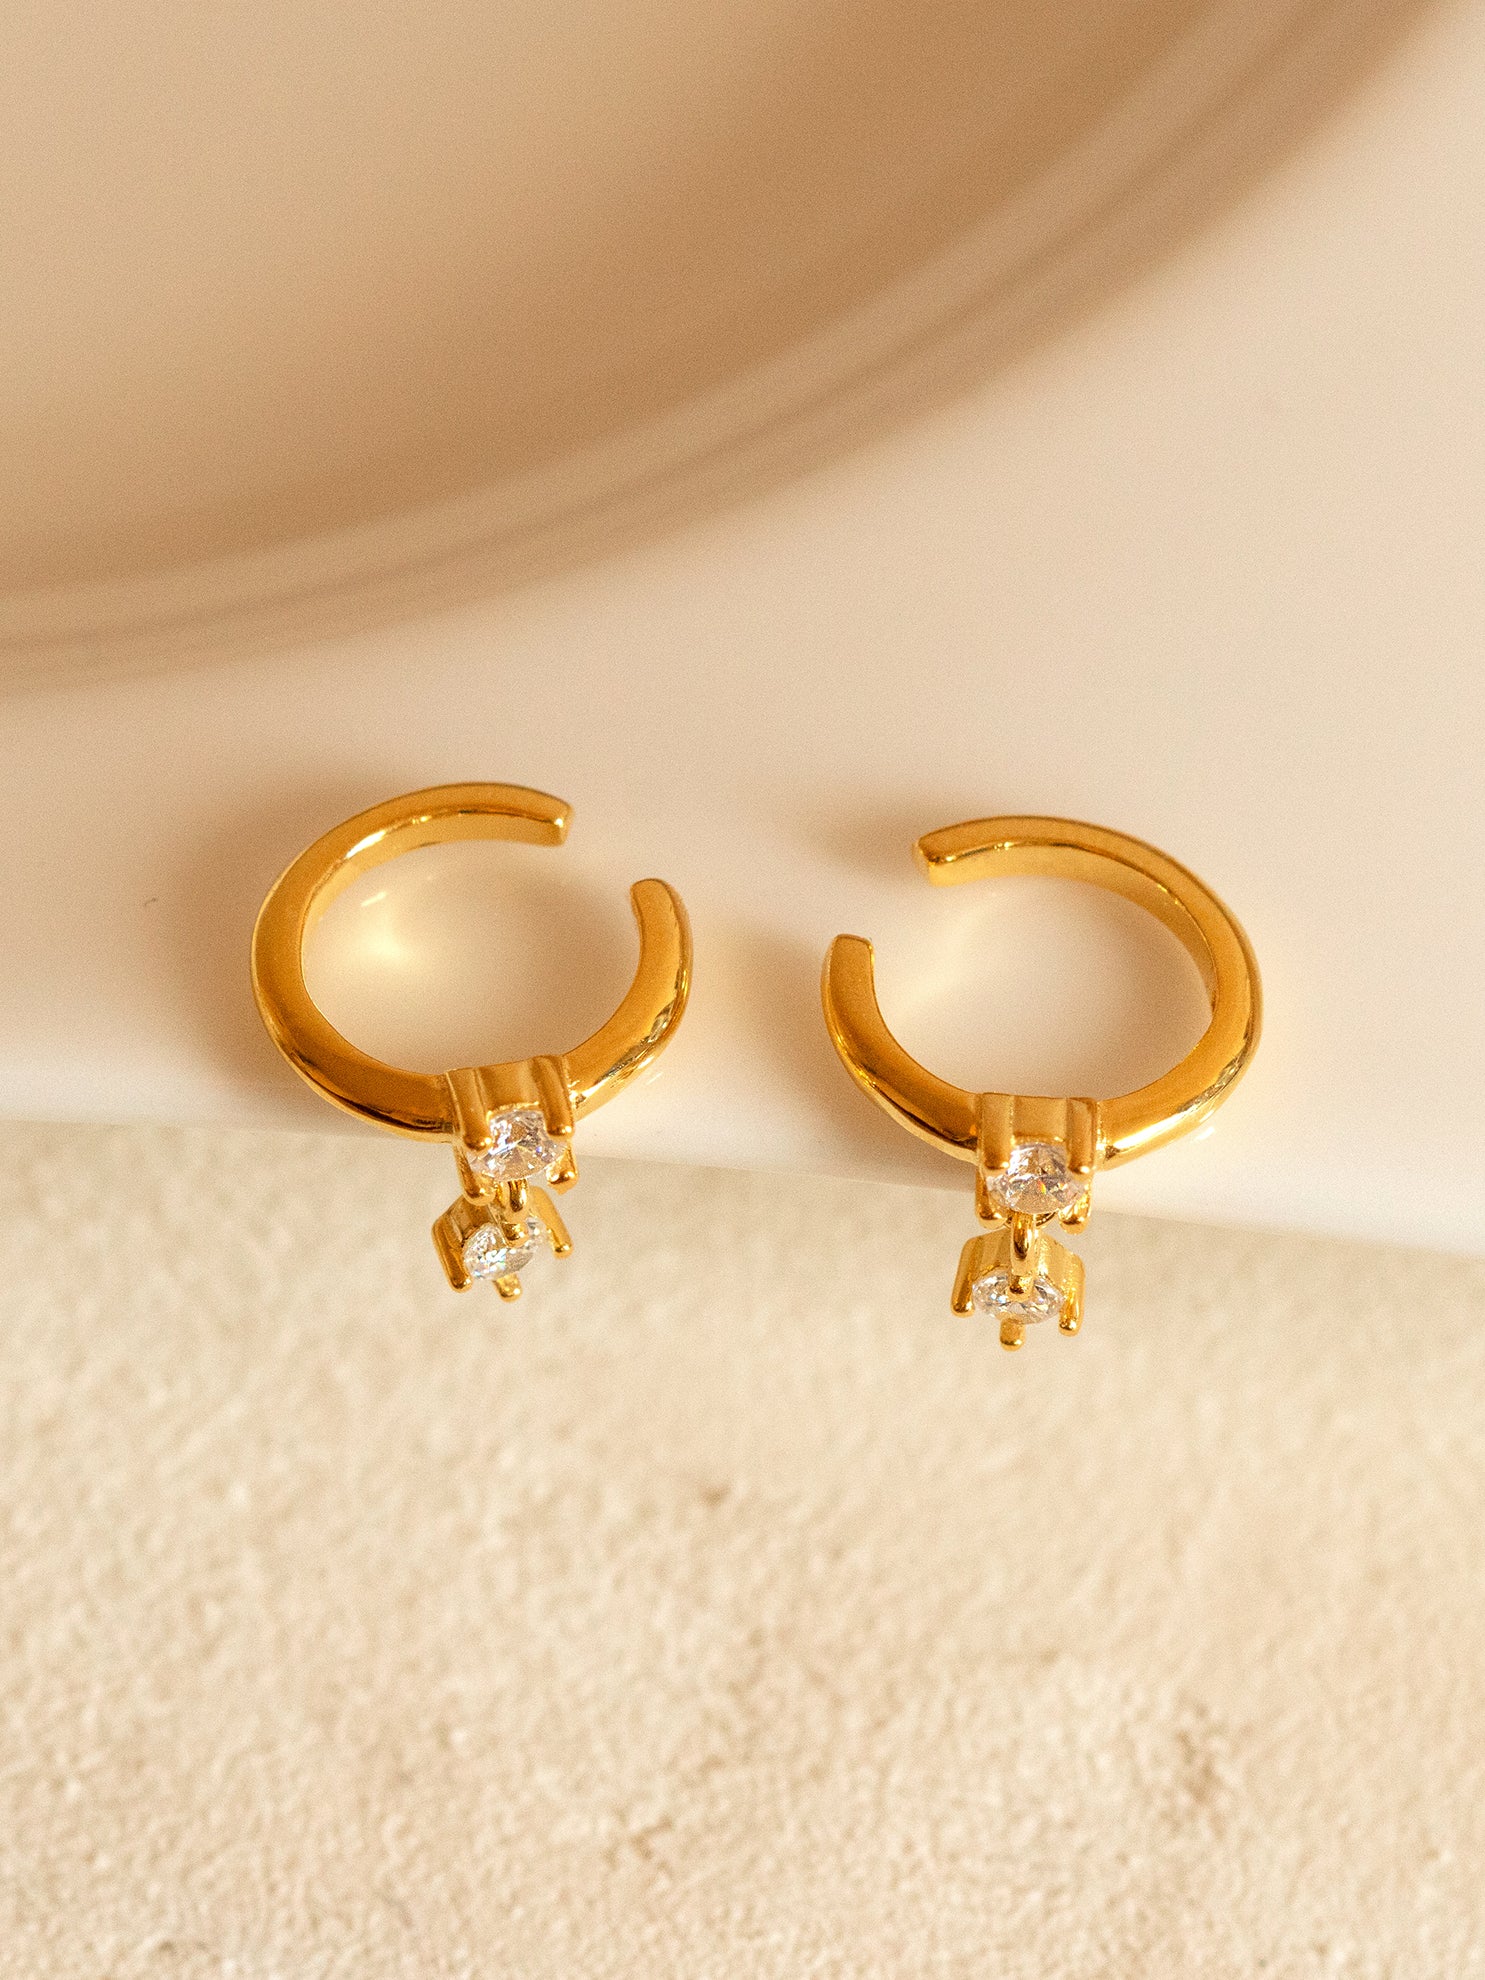 Gold Dangling Ear Cuffs With Stone Charms